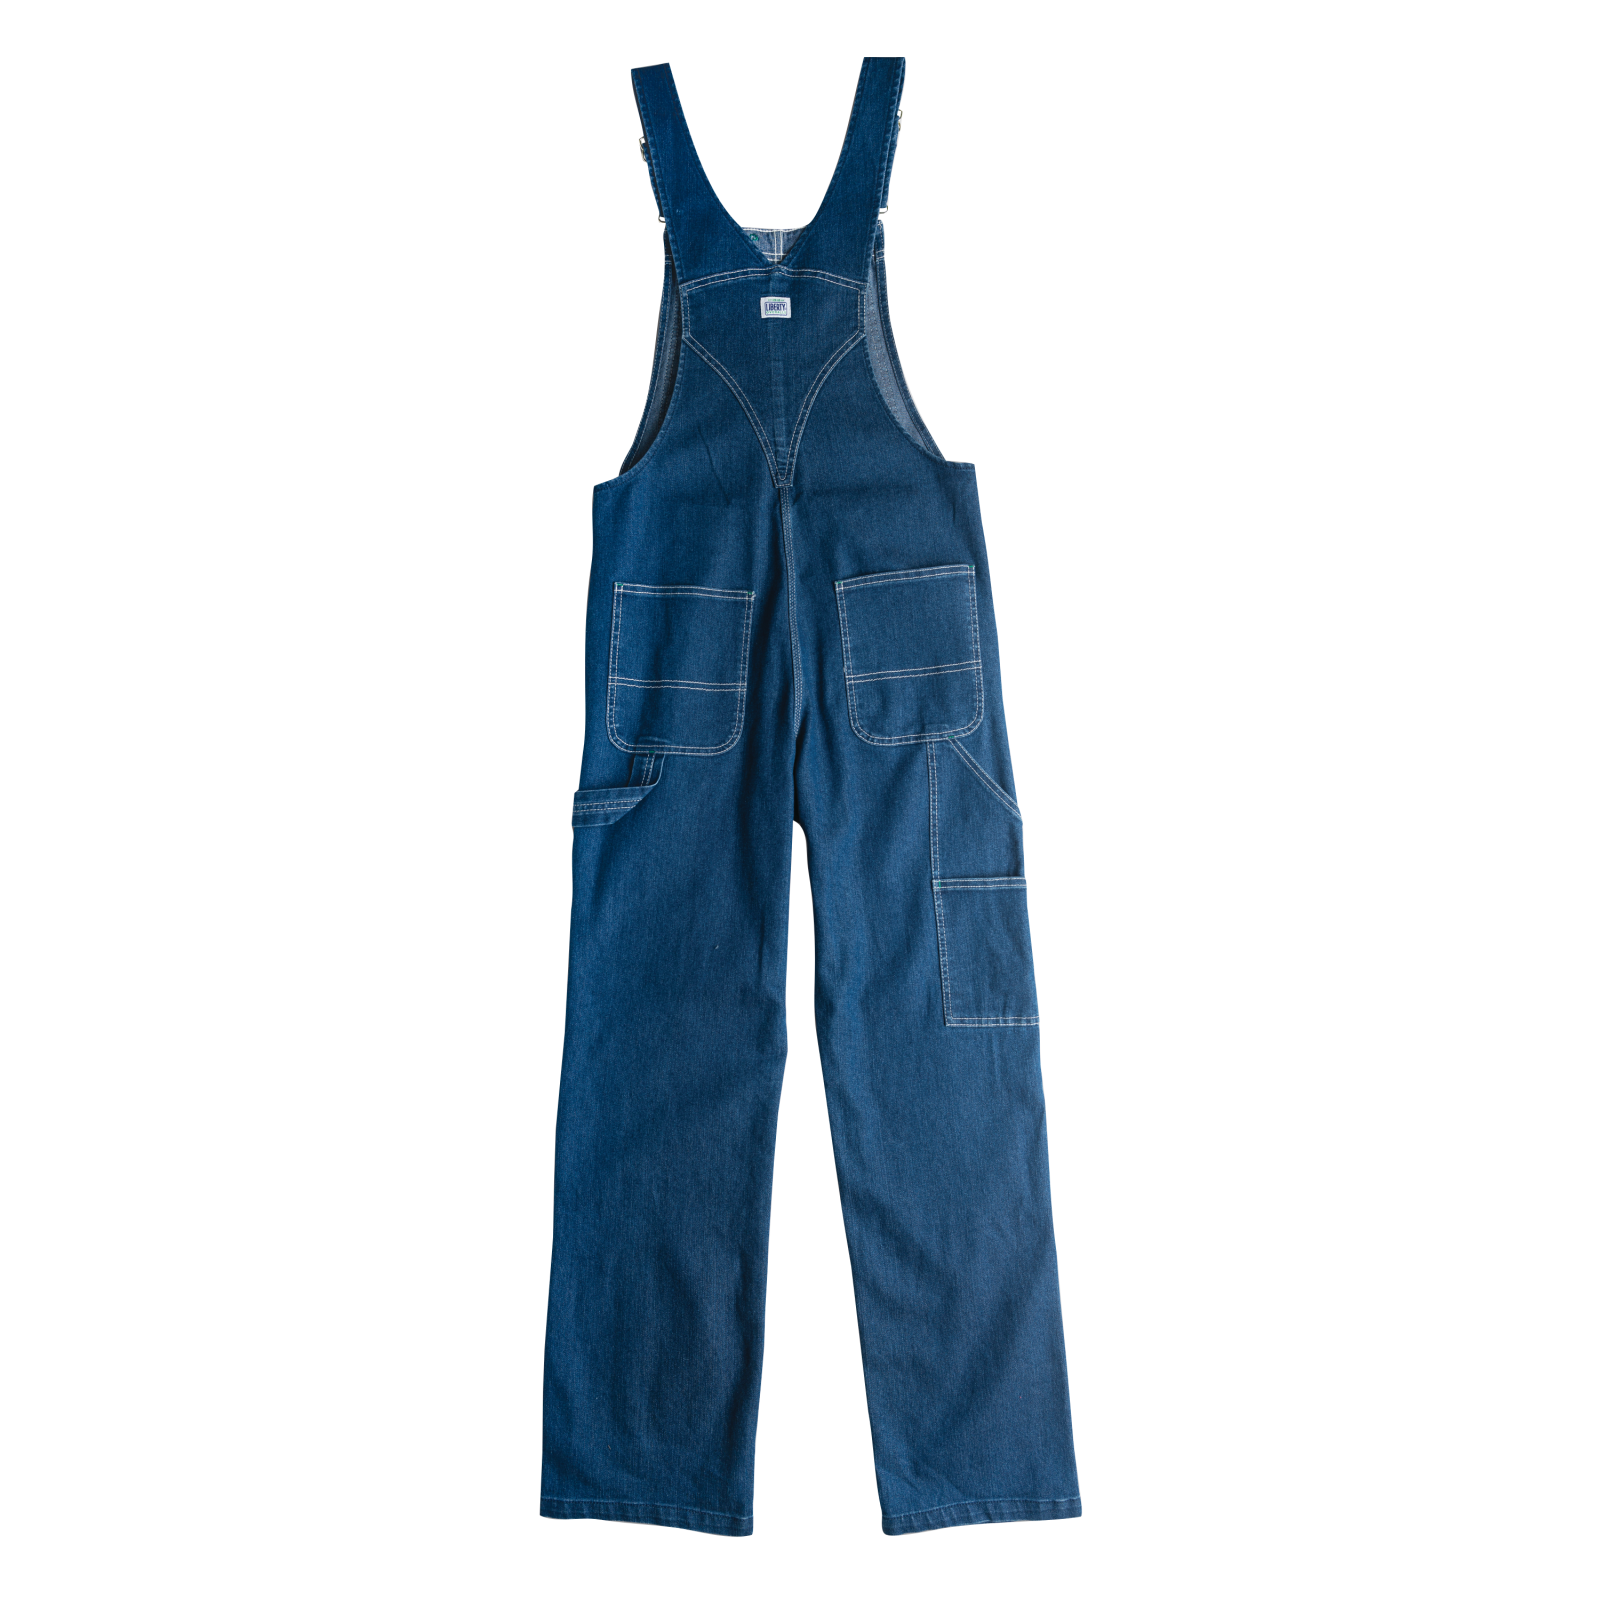 Mens Denim Dungarees Work Wear Bib and Brace Overall Painters Decorator  Coverall | eBay